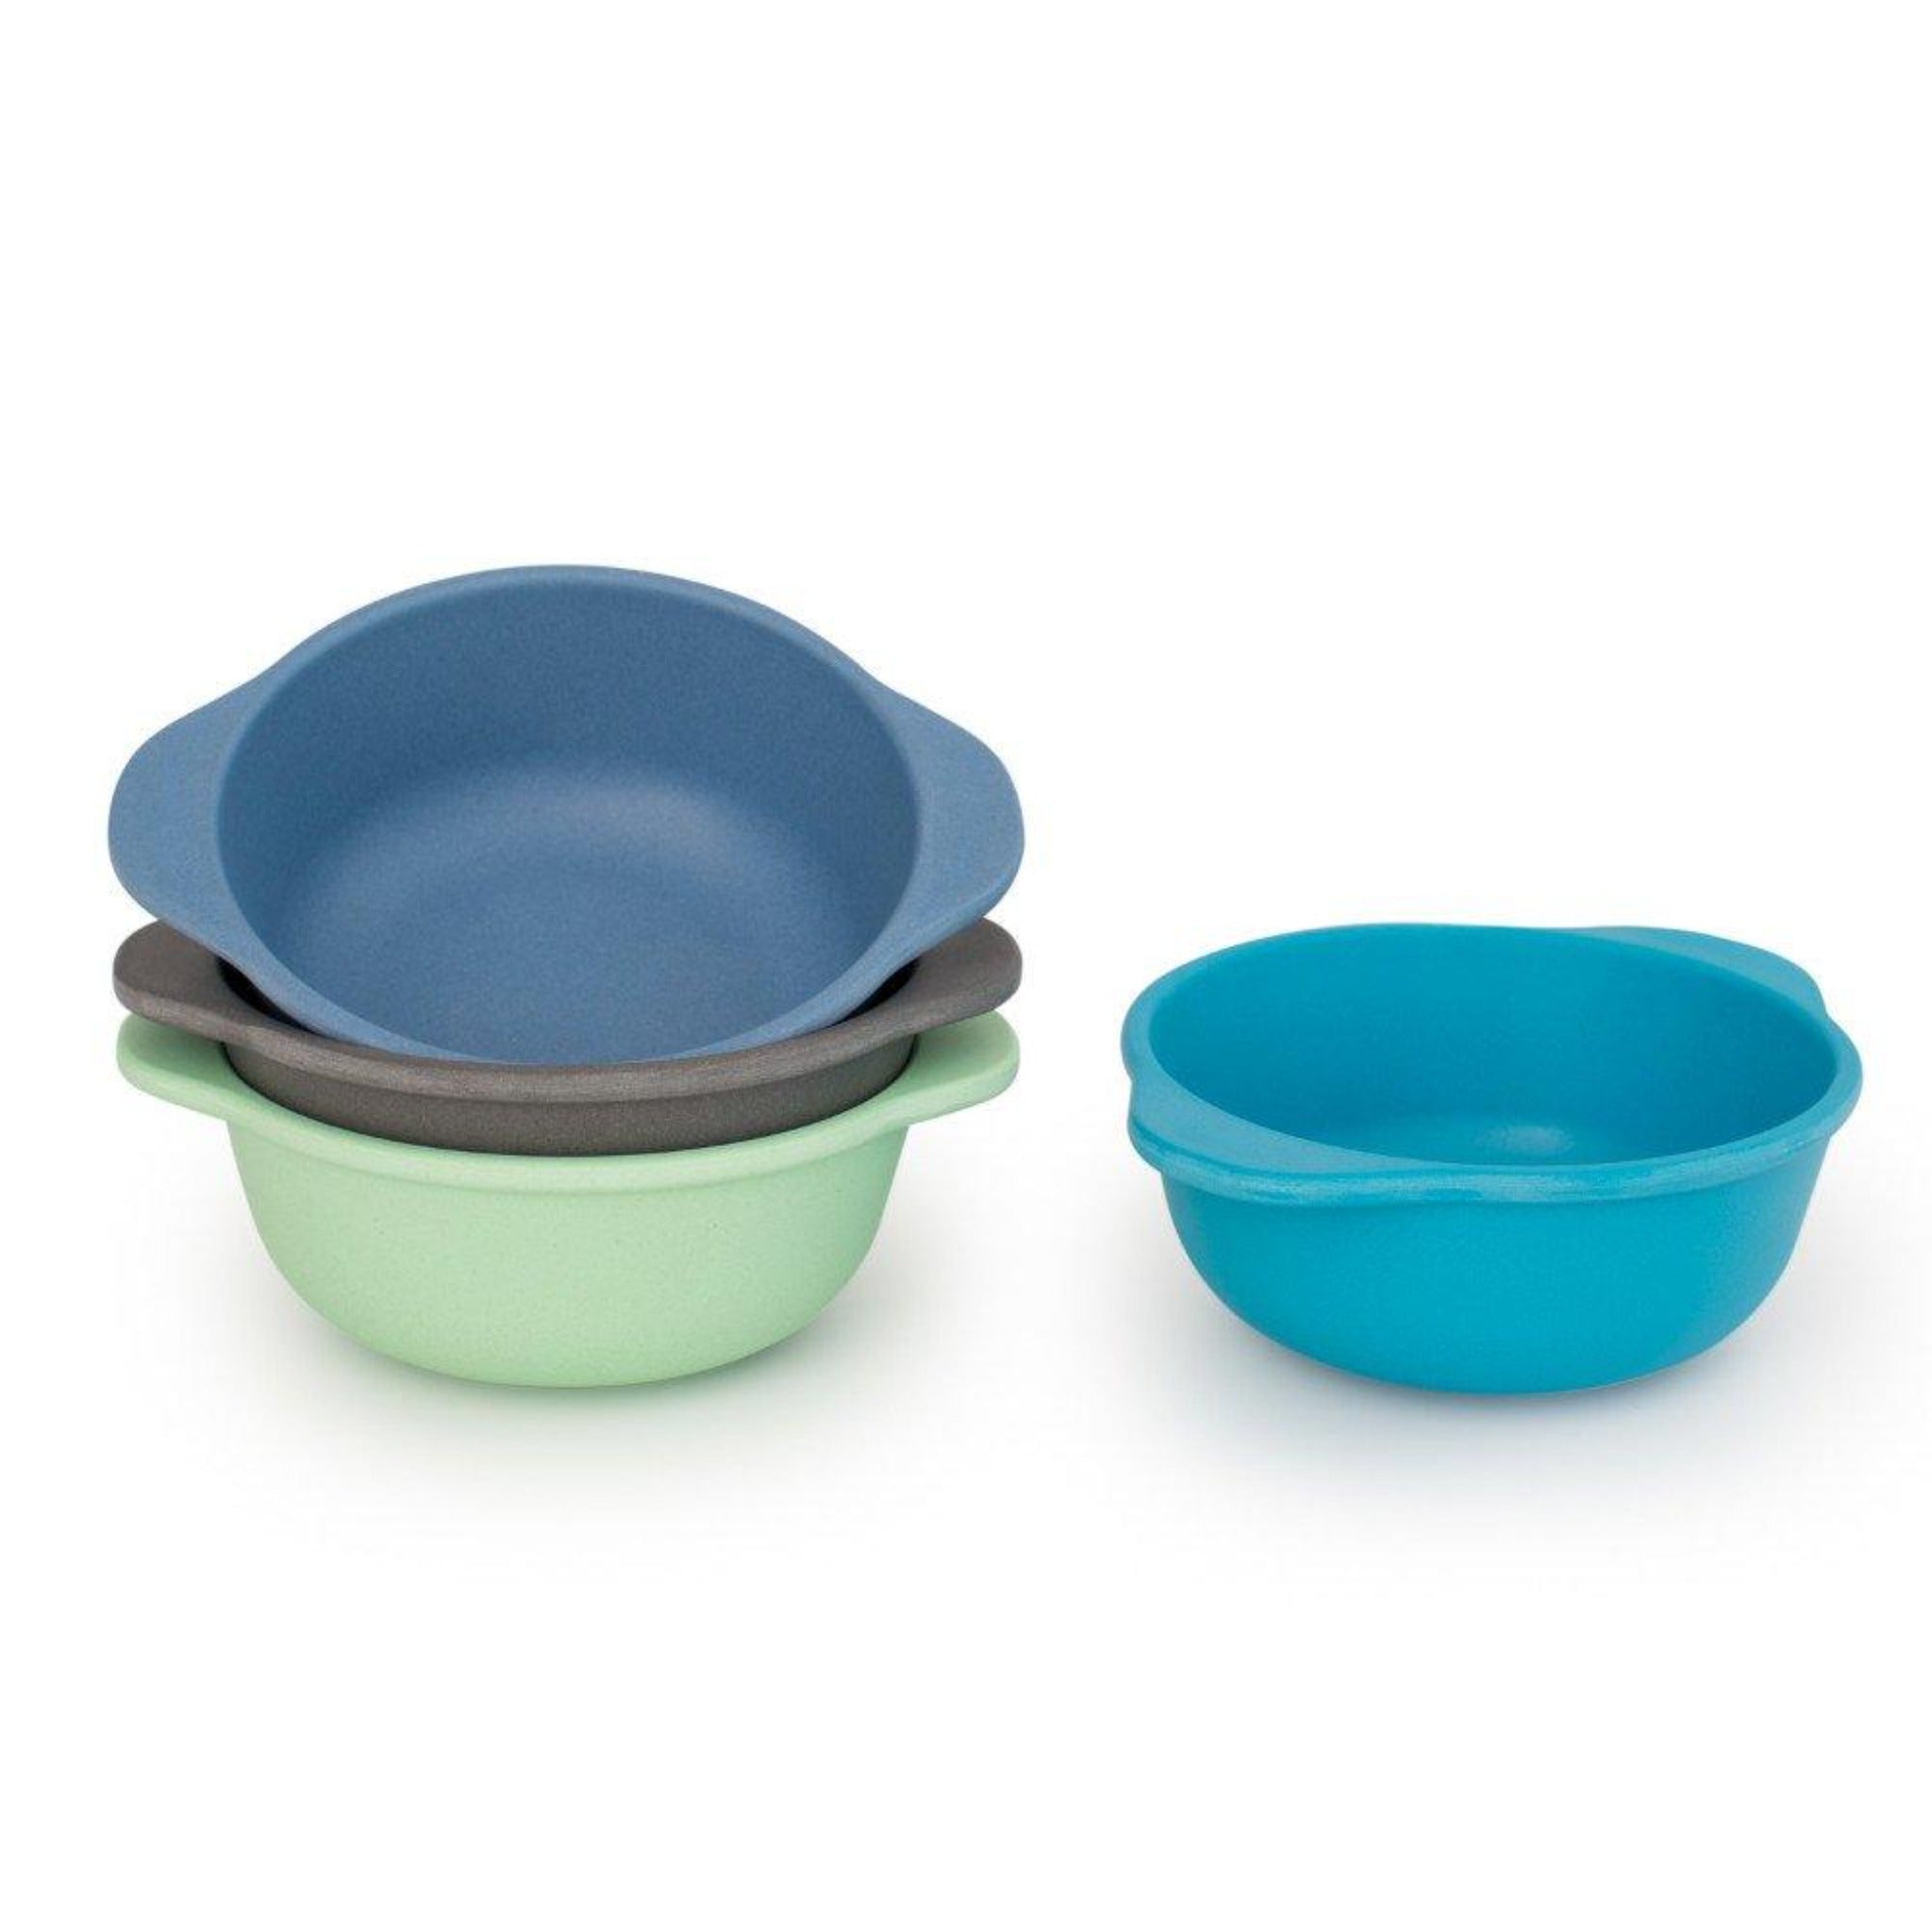 Glass mixing bowl set with bamboo lids. Oven and Microwave safe.